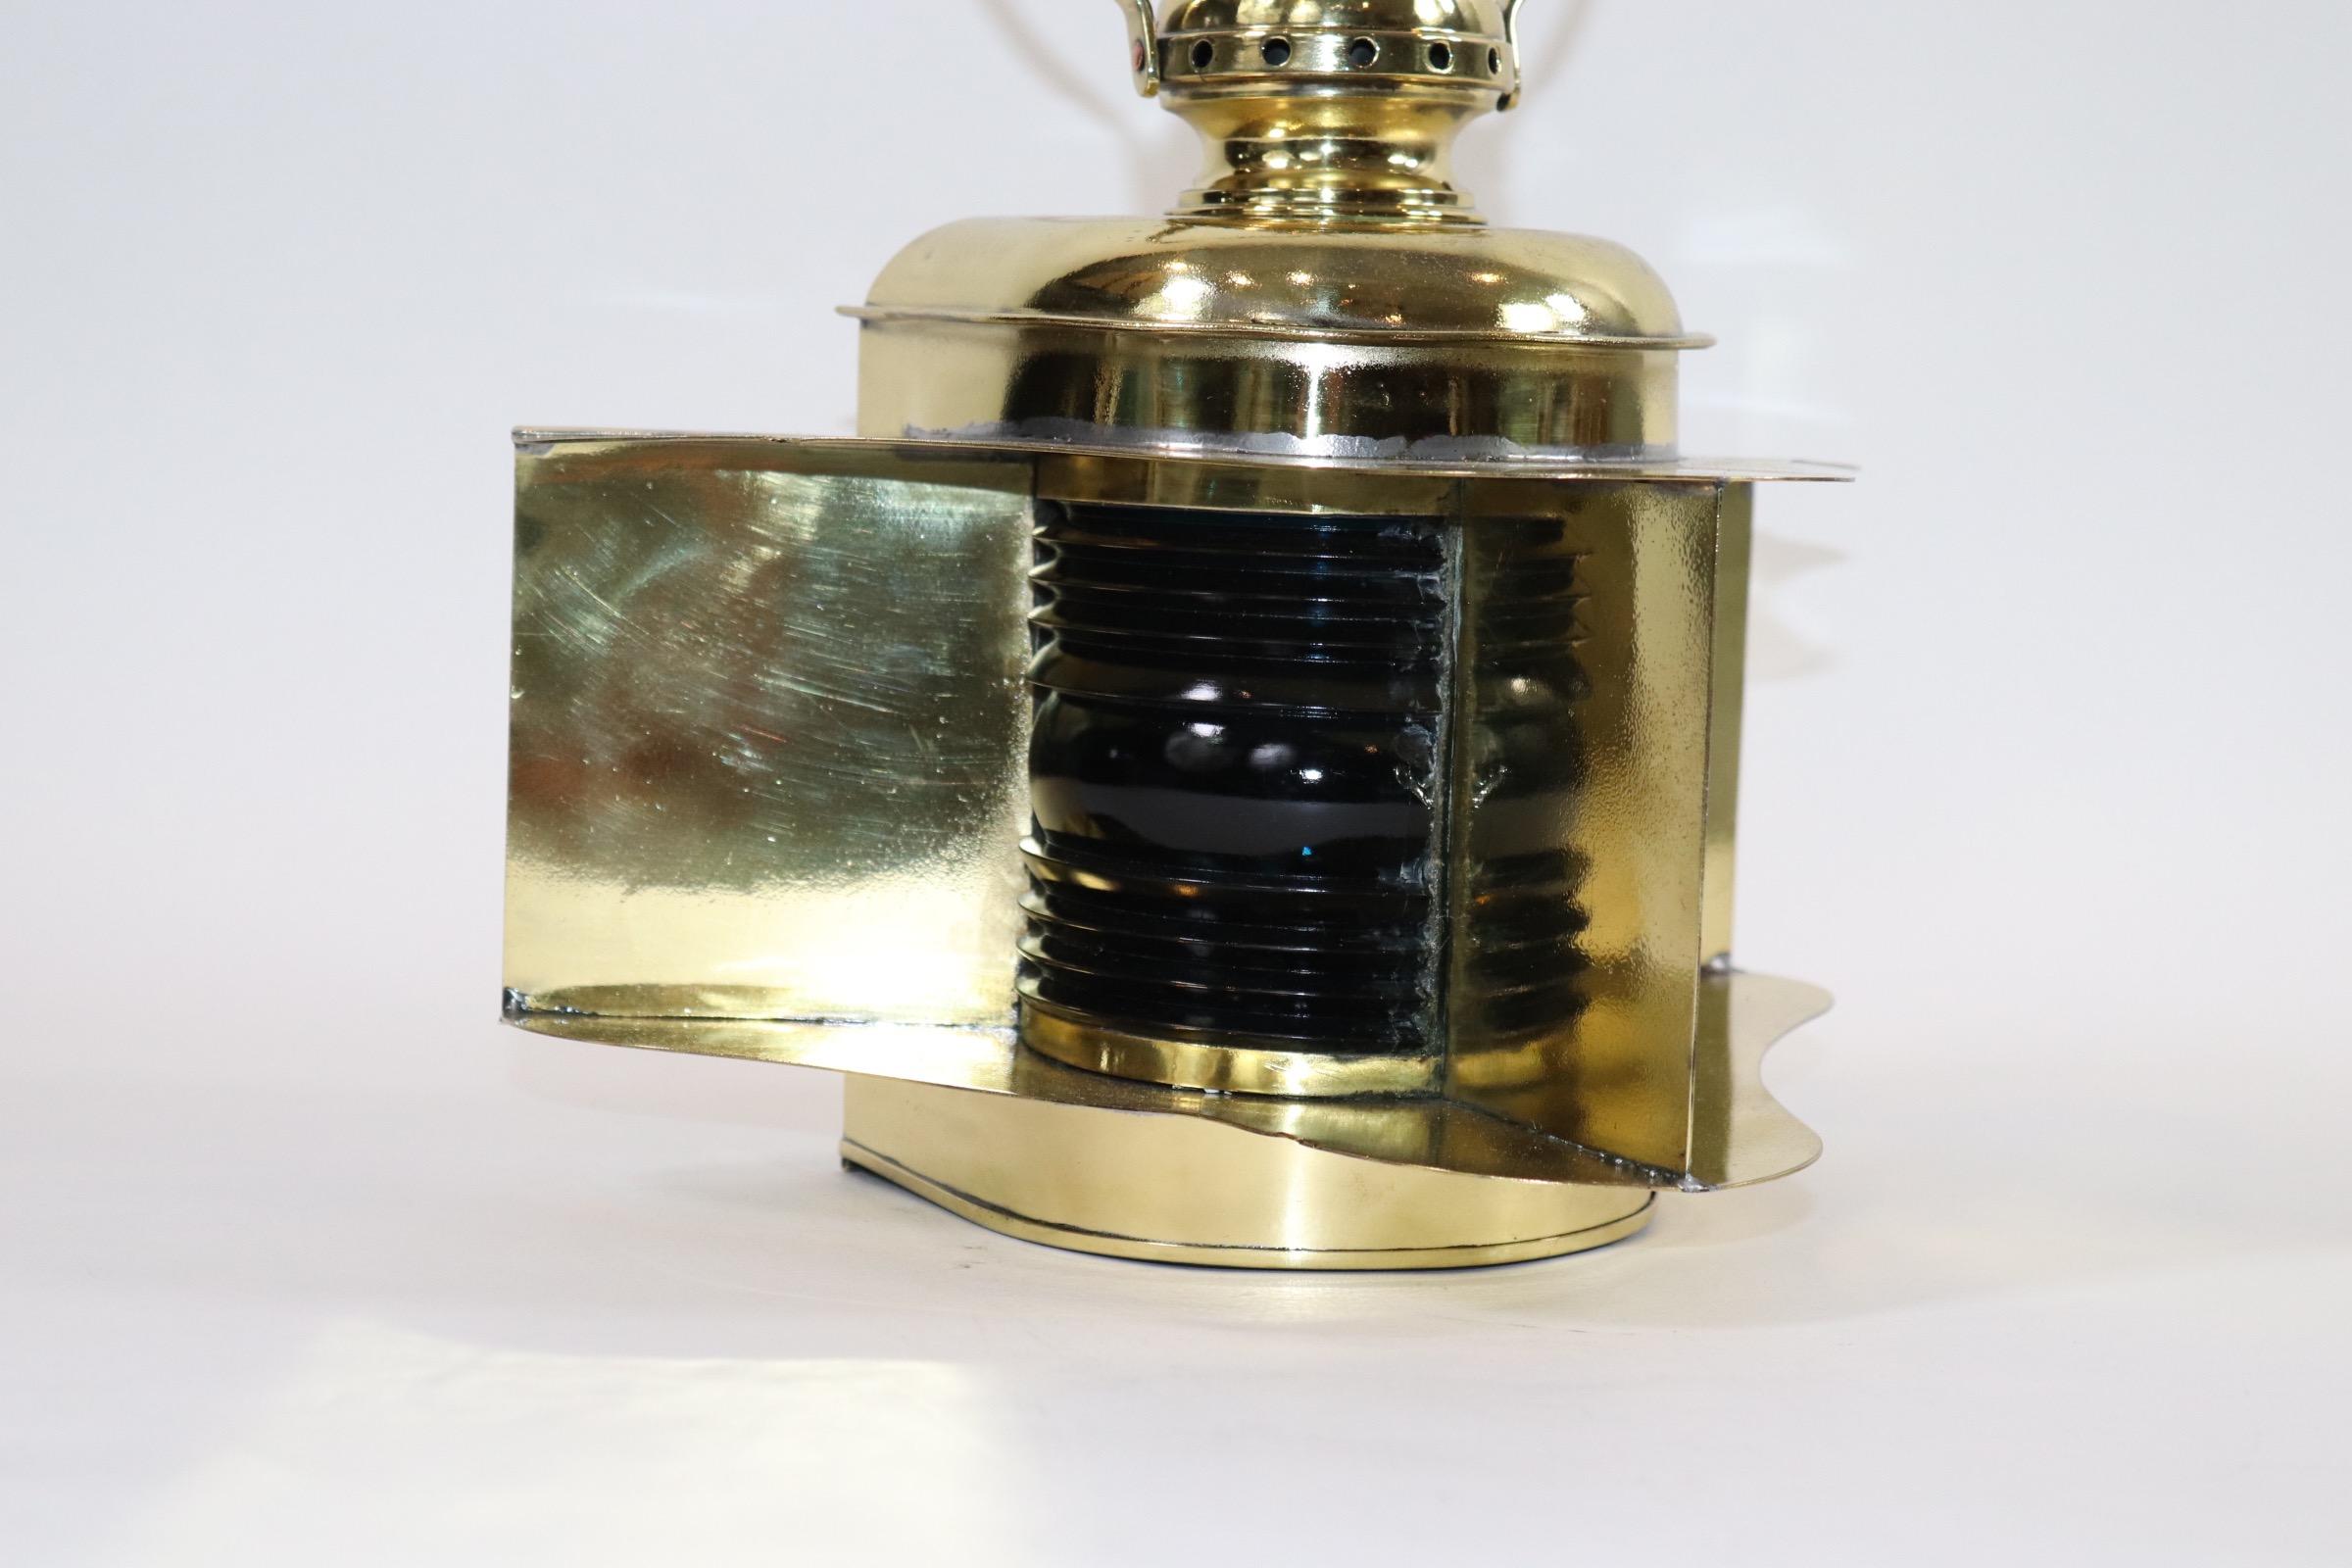 Ship or yacht bow lantern by maker Robert Findlay of New York. With red and blue Fresnel glass lenses, hinged rear door, vented top, carry handle, etc. Weight is 6 pounds.